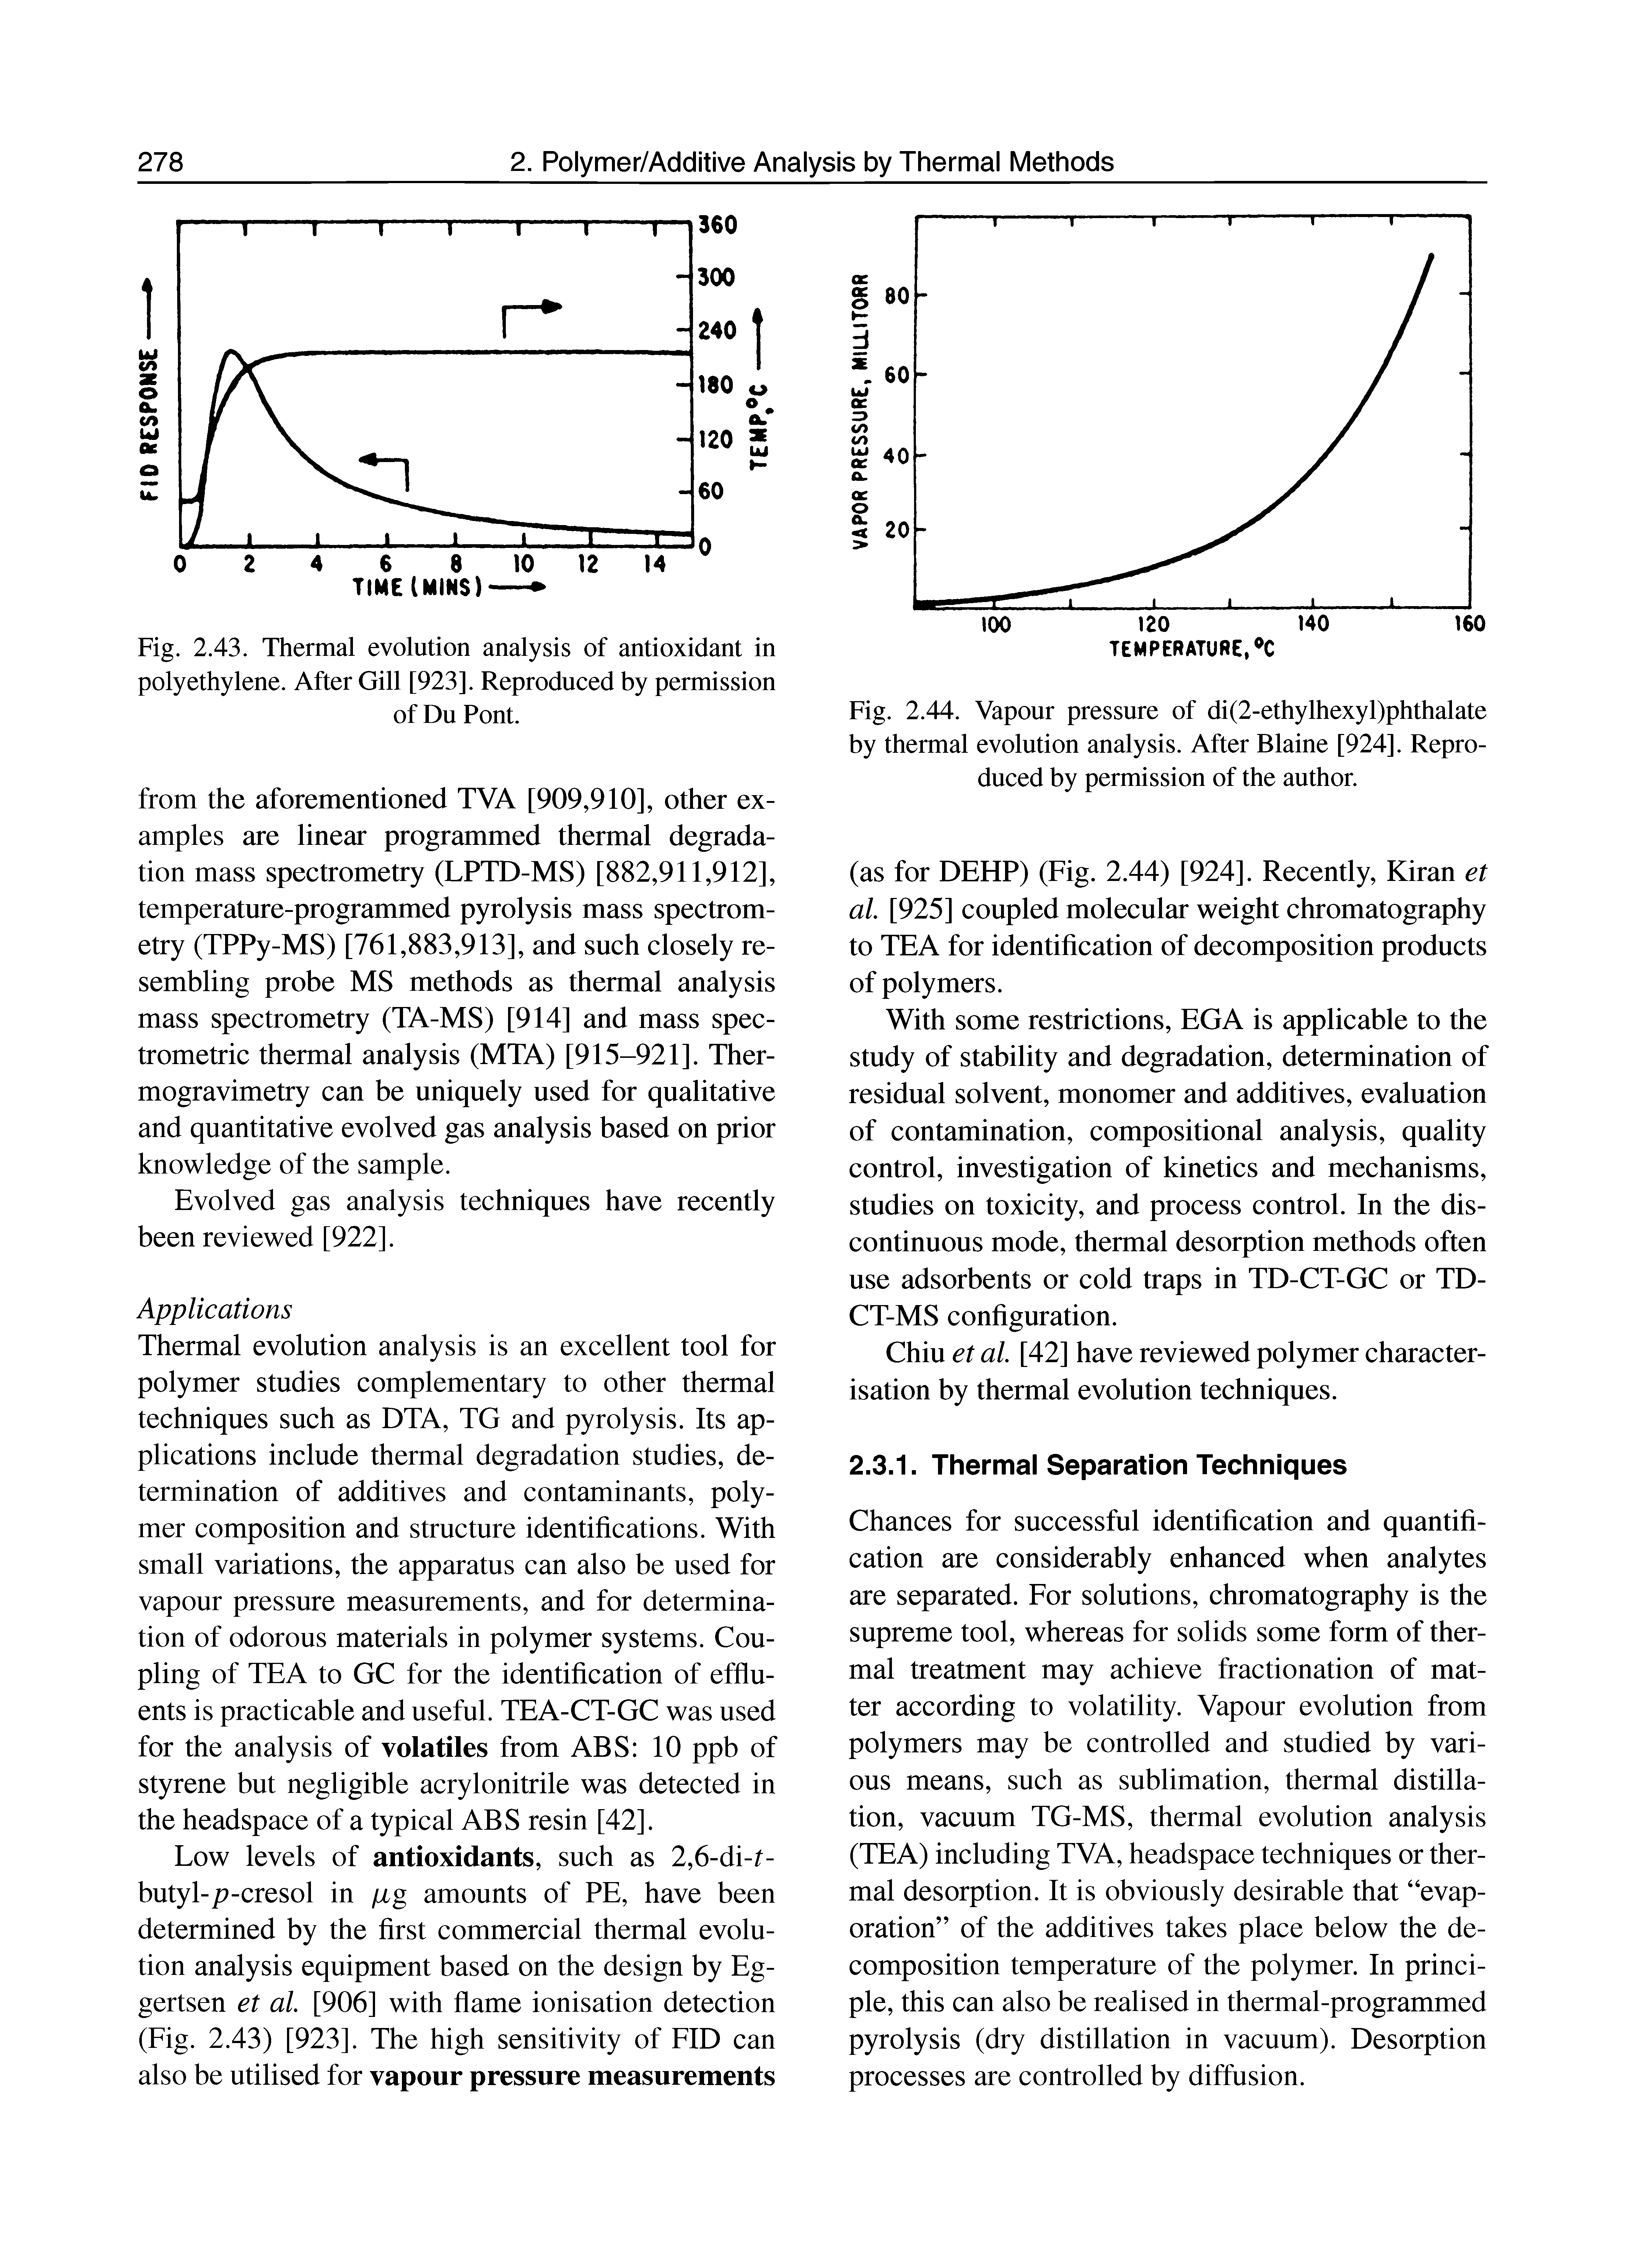 Fig. 2.43. Thermal evolution analysis of antioxidant in polyethylene. After Gill [923]. Reproduced by permission of Du Pont.